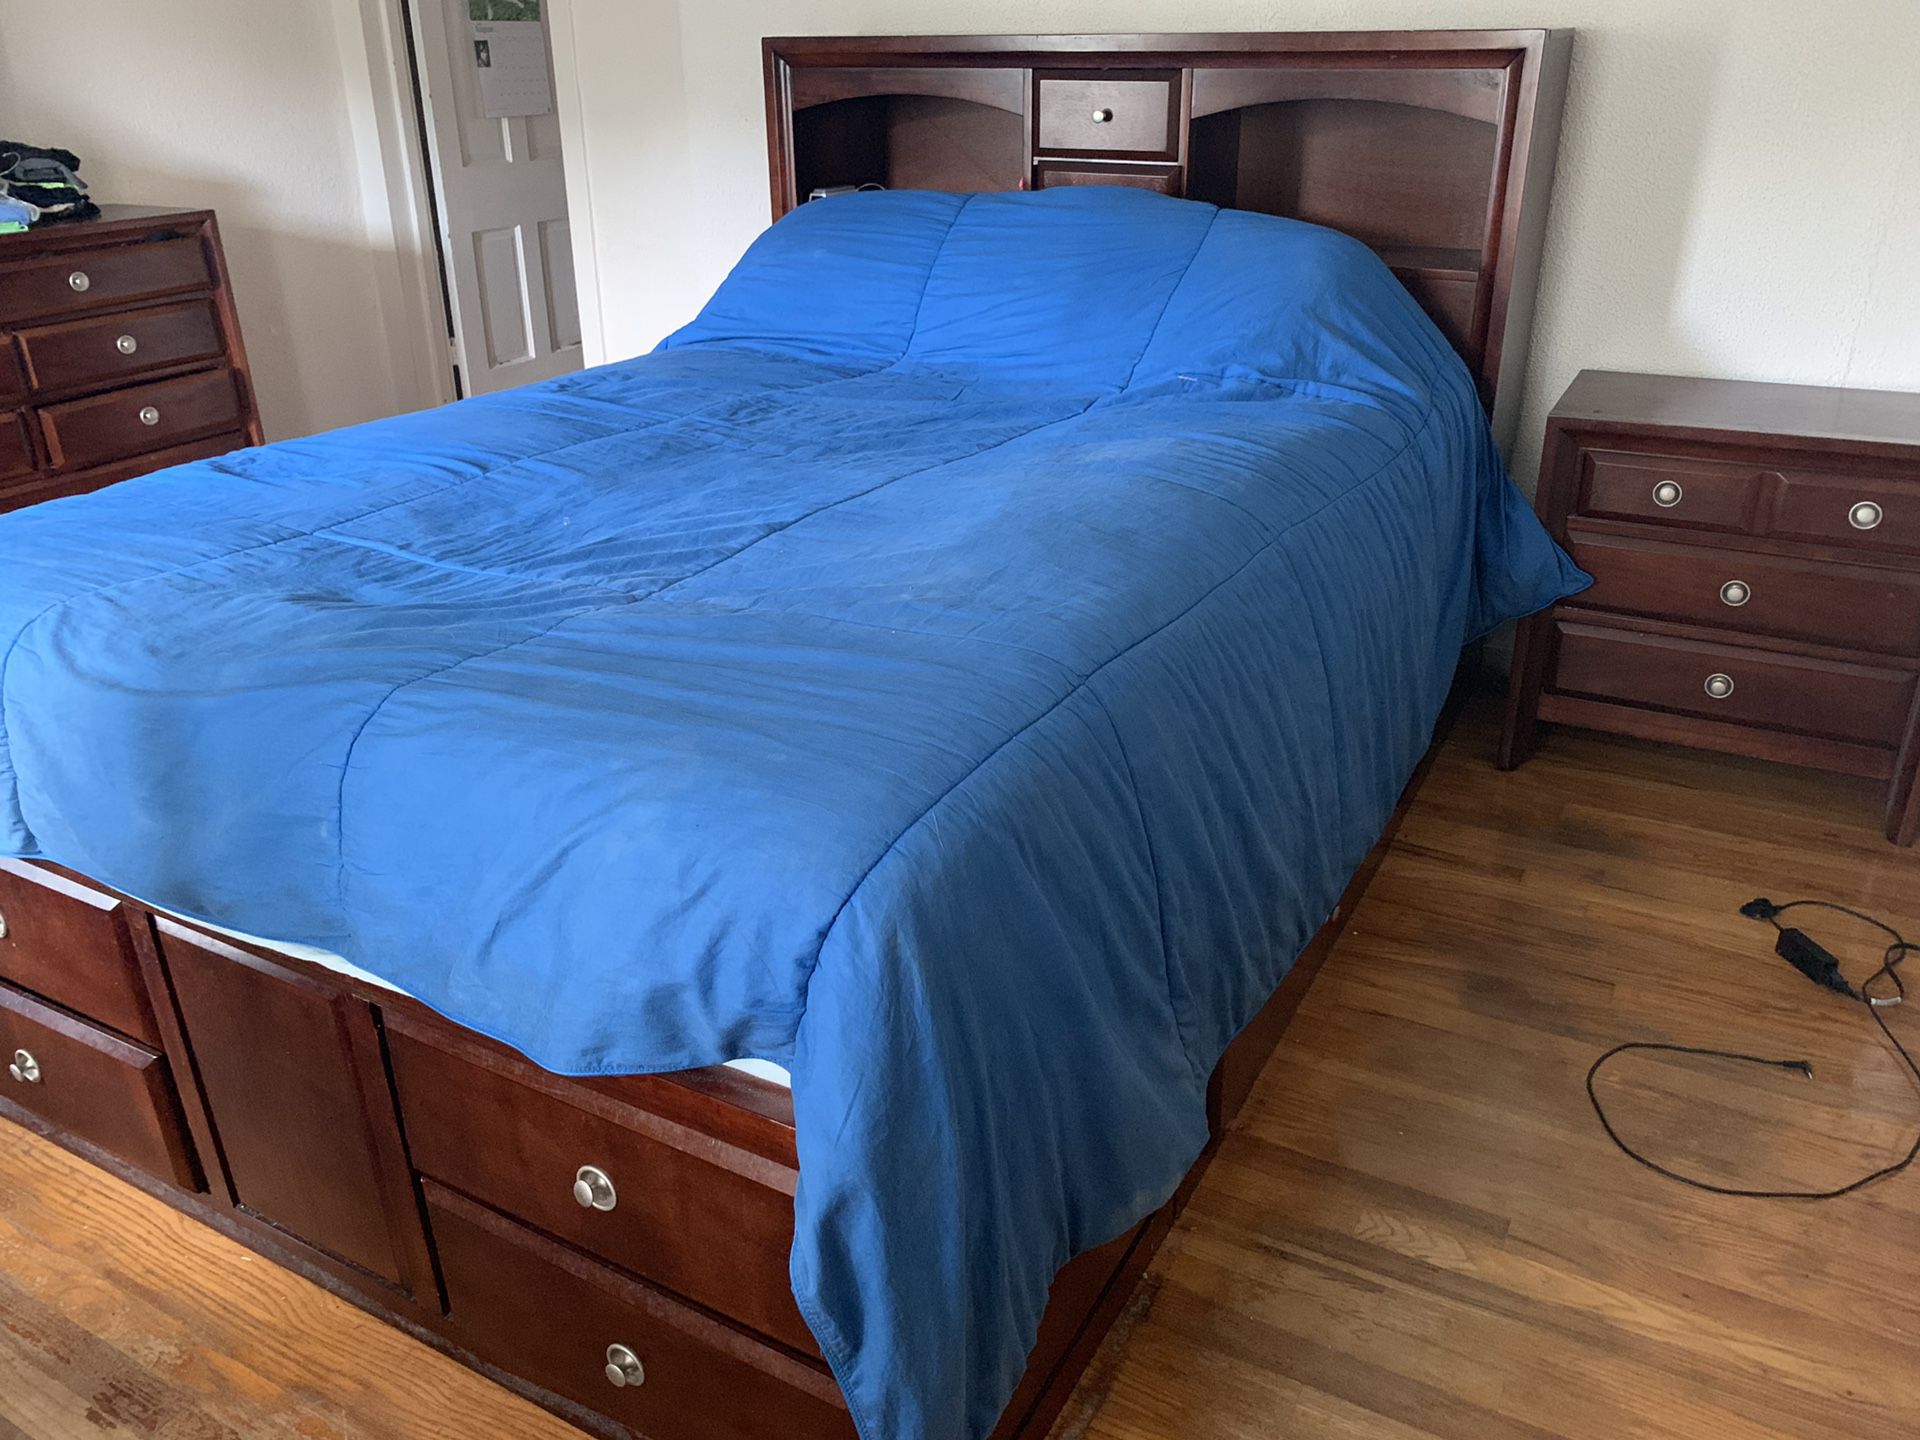 Queen size bed frame with drawers